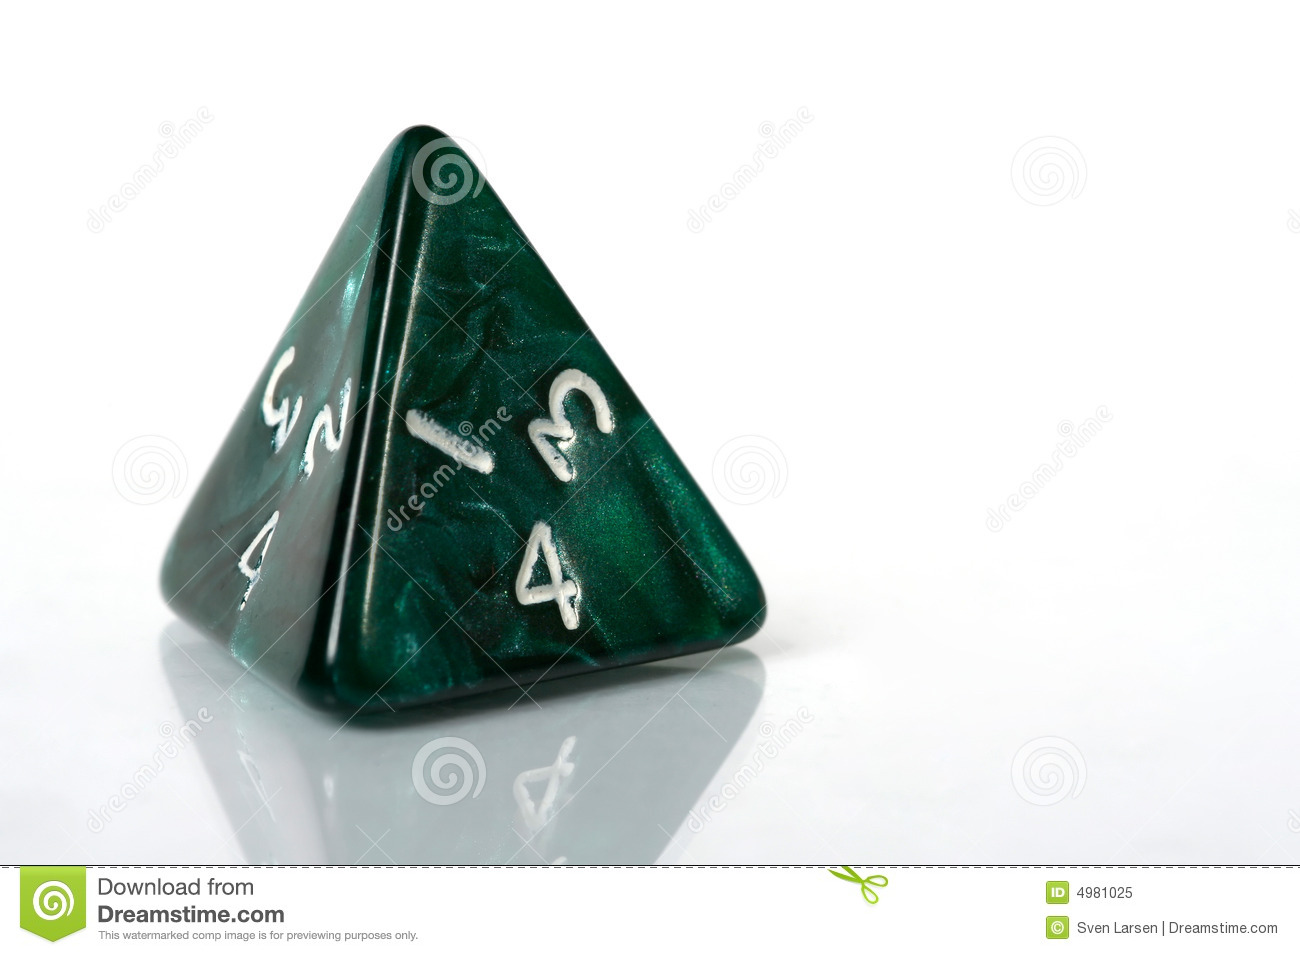 Four Sided Dice Royalty Free Stock Photo   Image  4981025